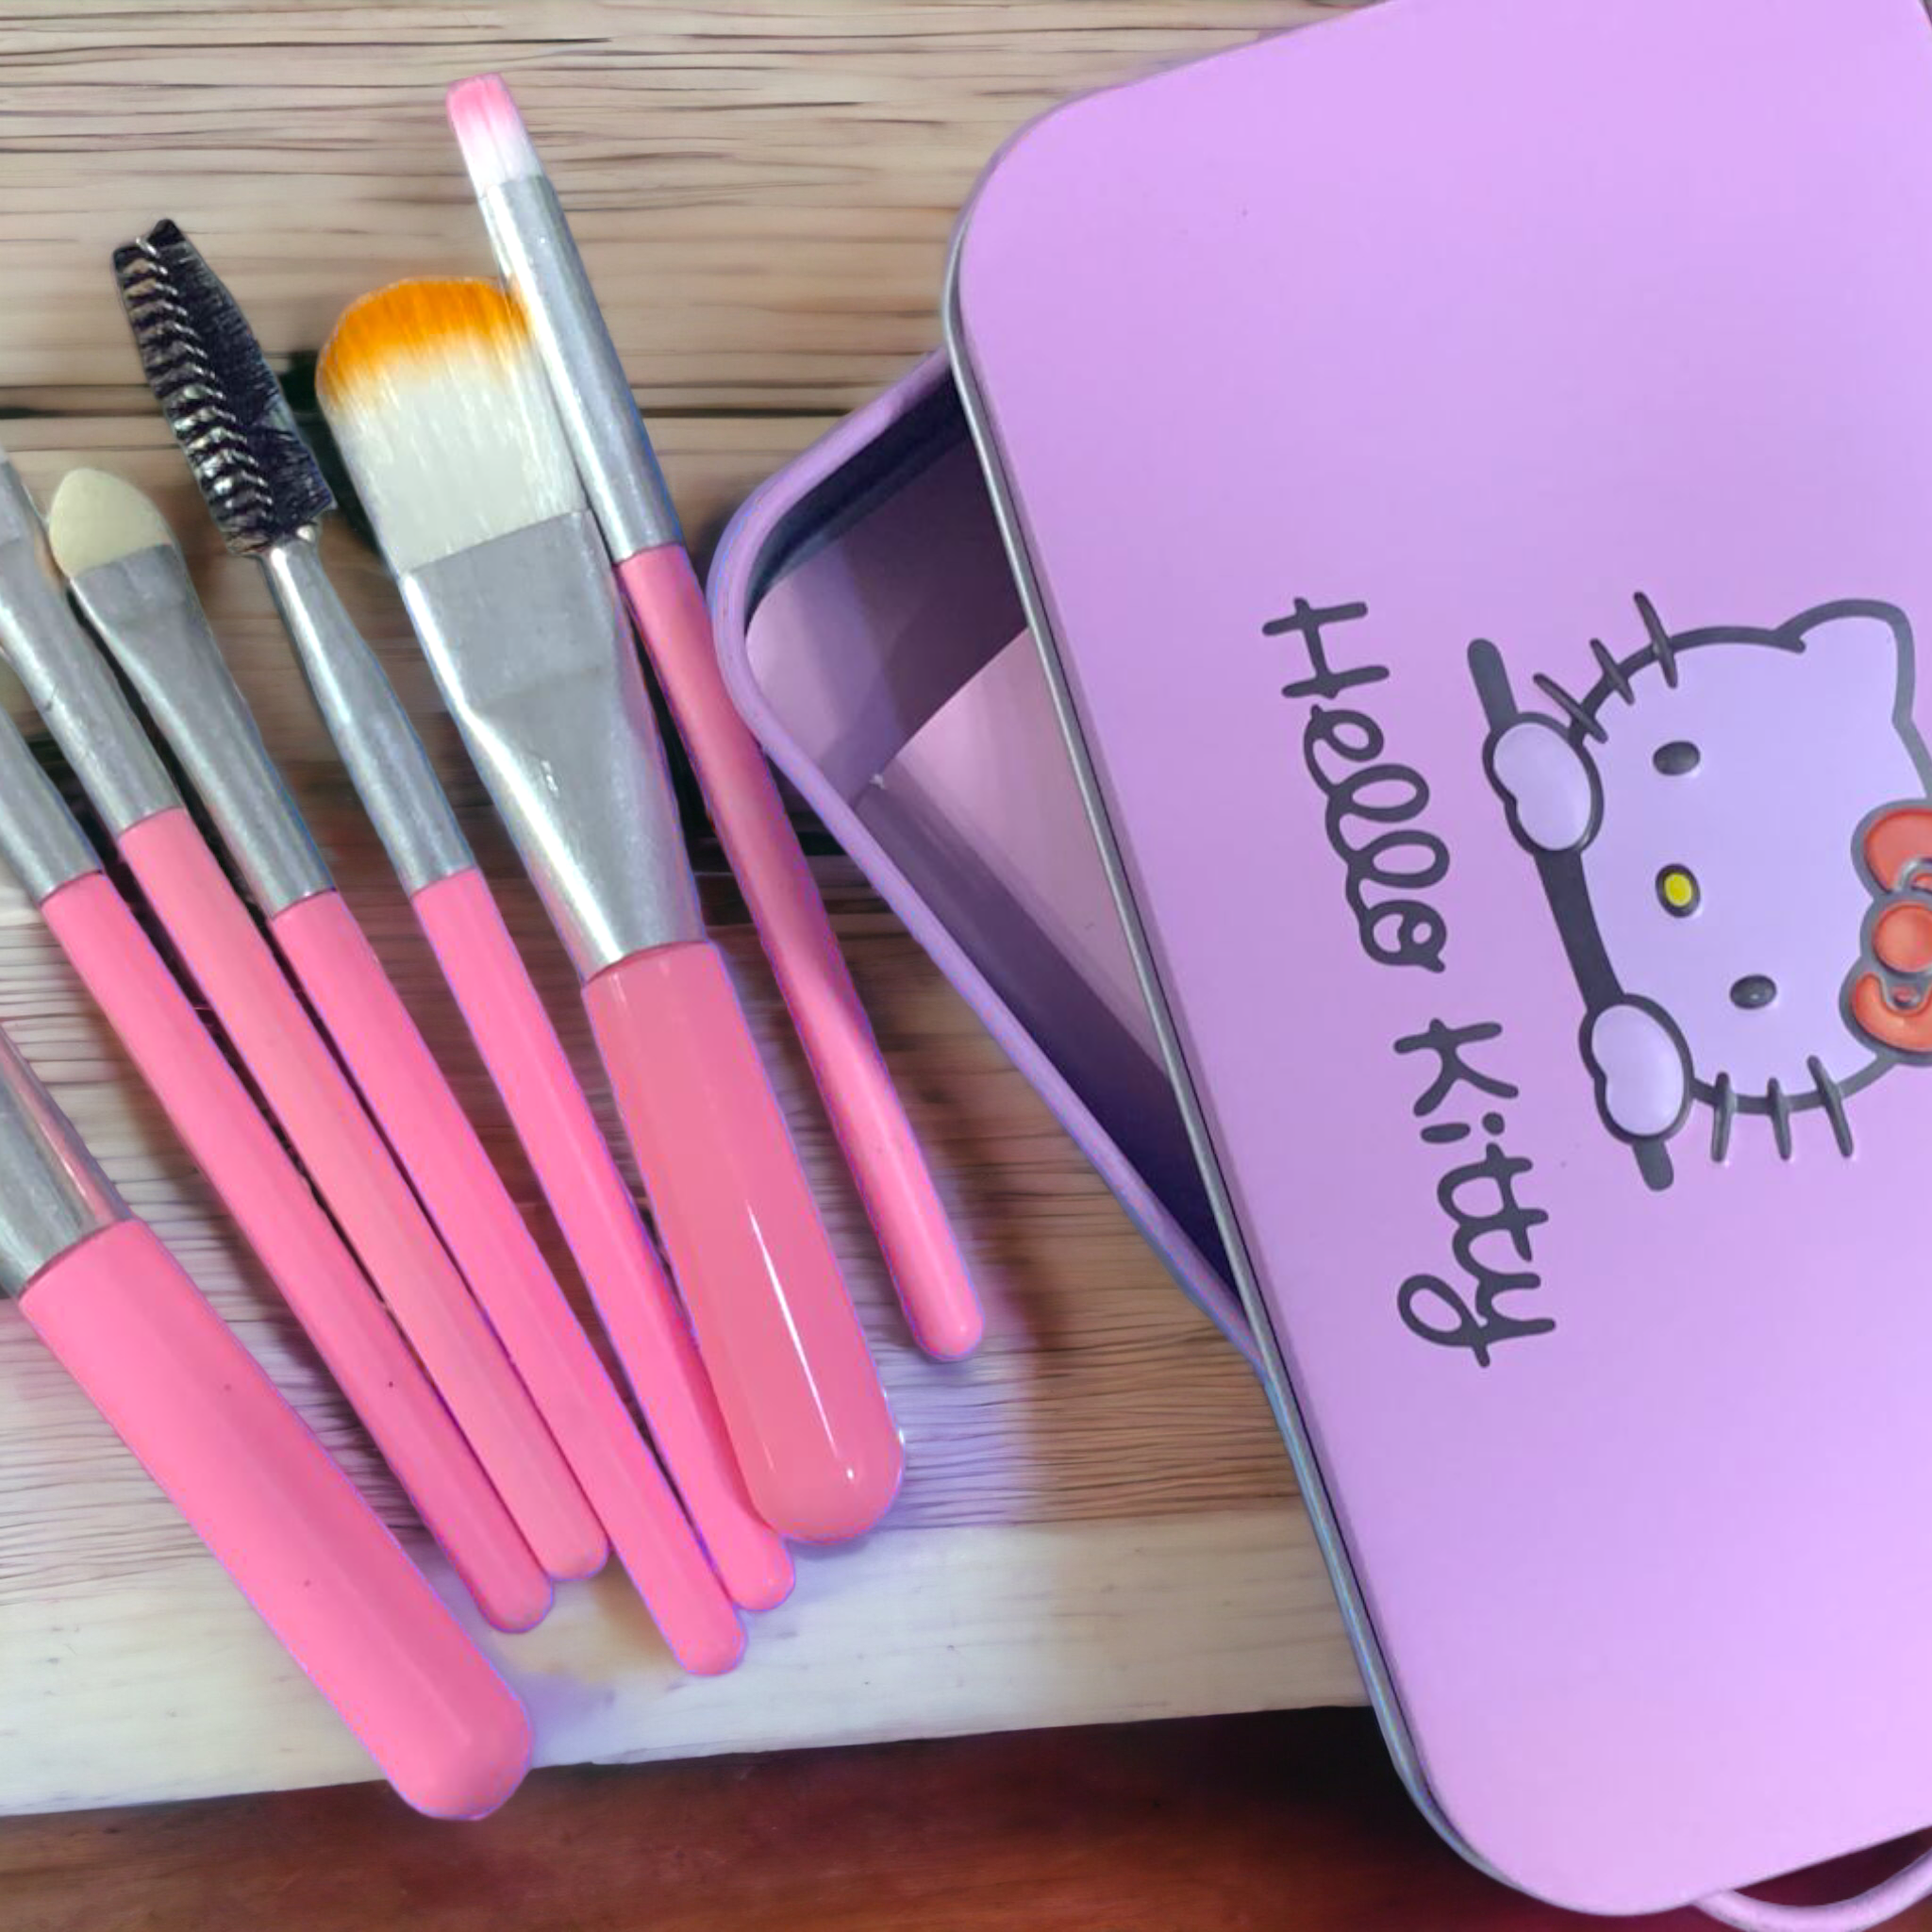 Hello Kitty Original Soft Makeup Brushes: 7-Piece Pack